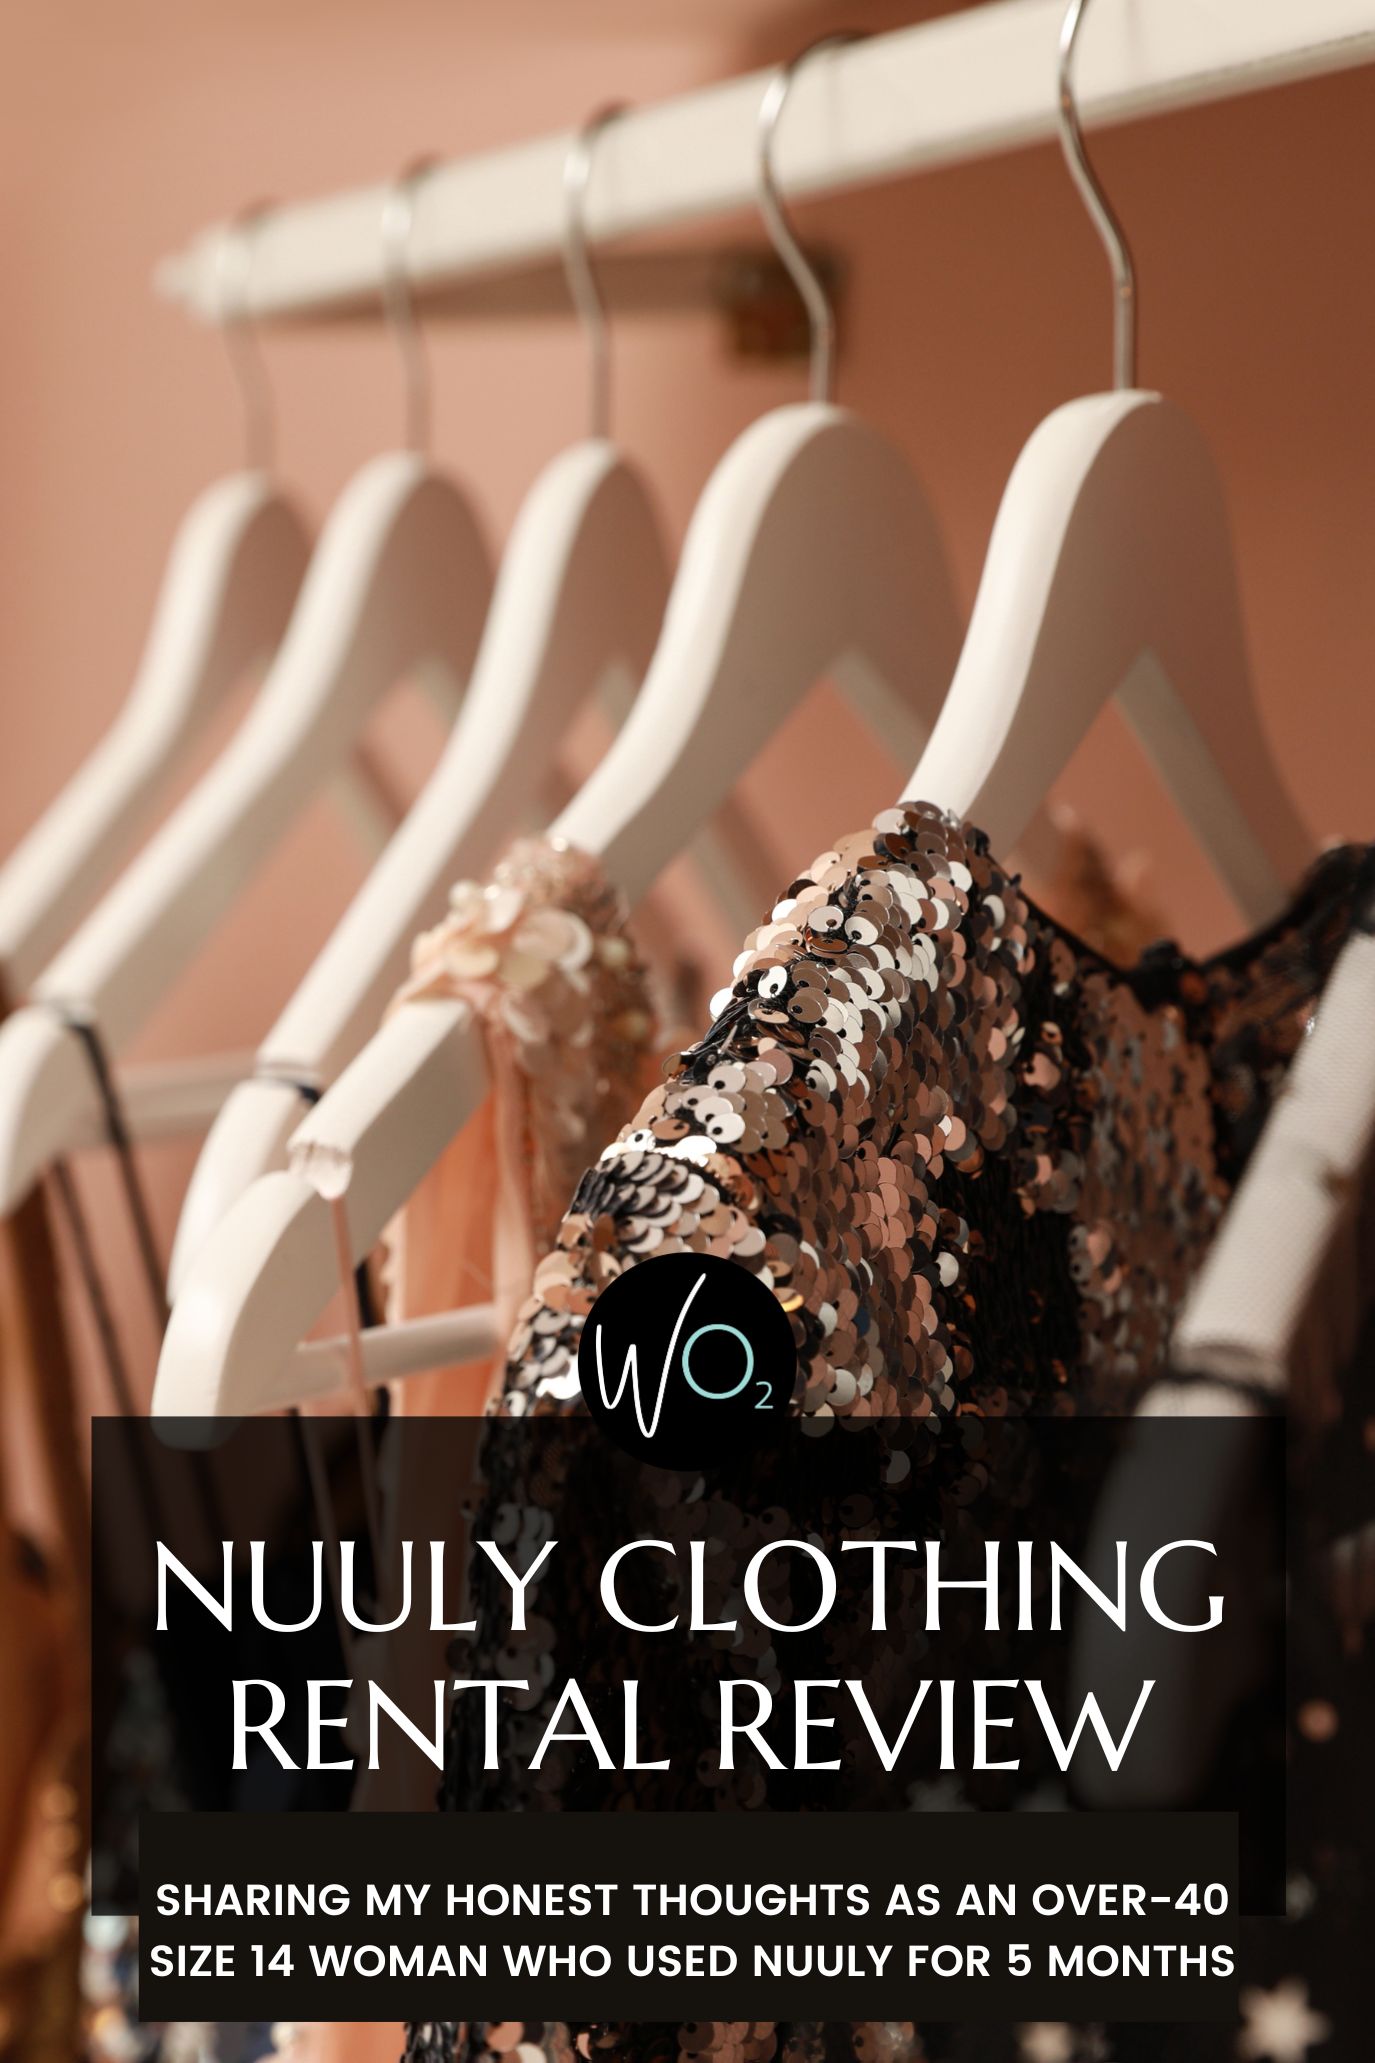 Nuuly Clothing Rental Review by an Over-40 Midsize Woman